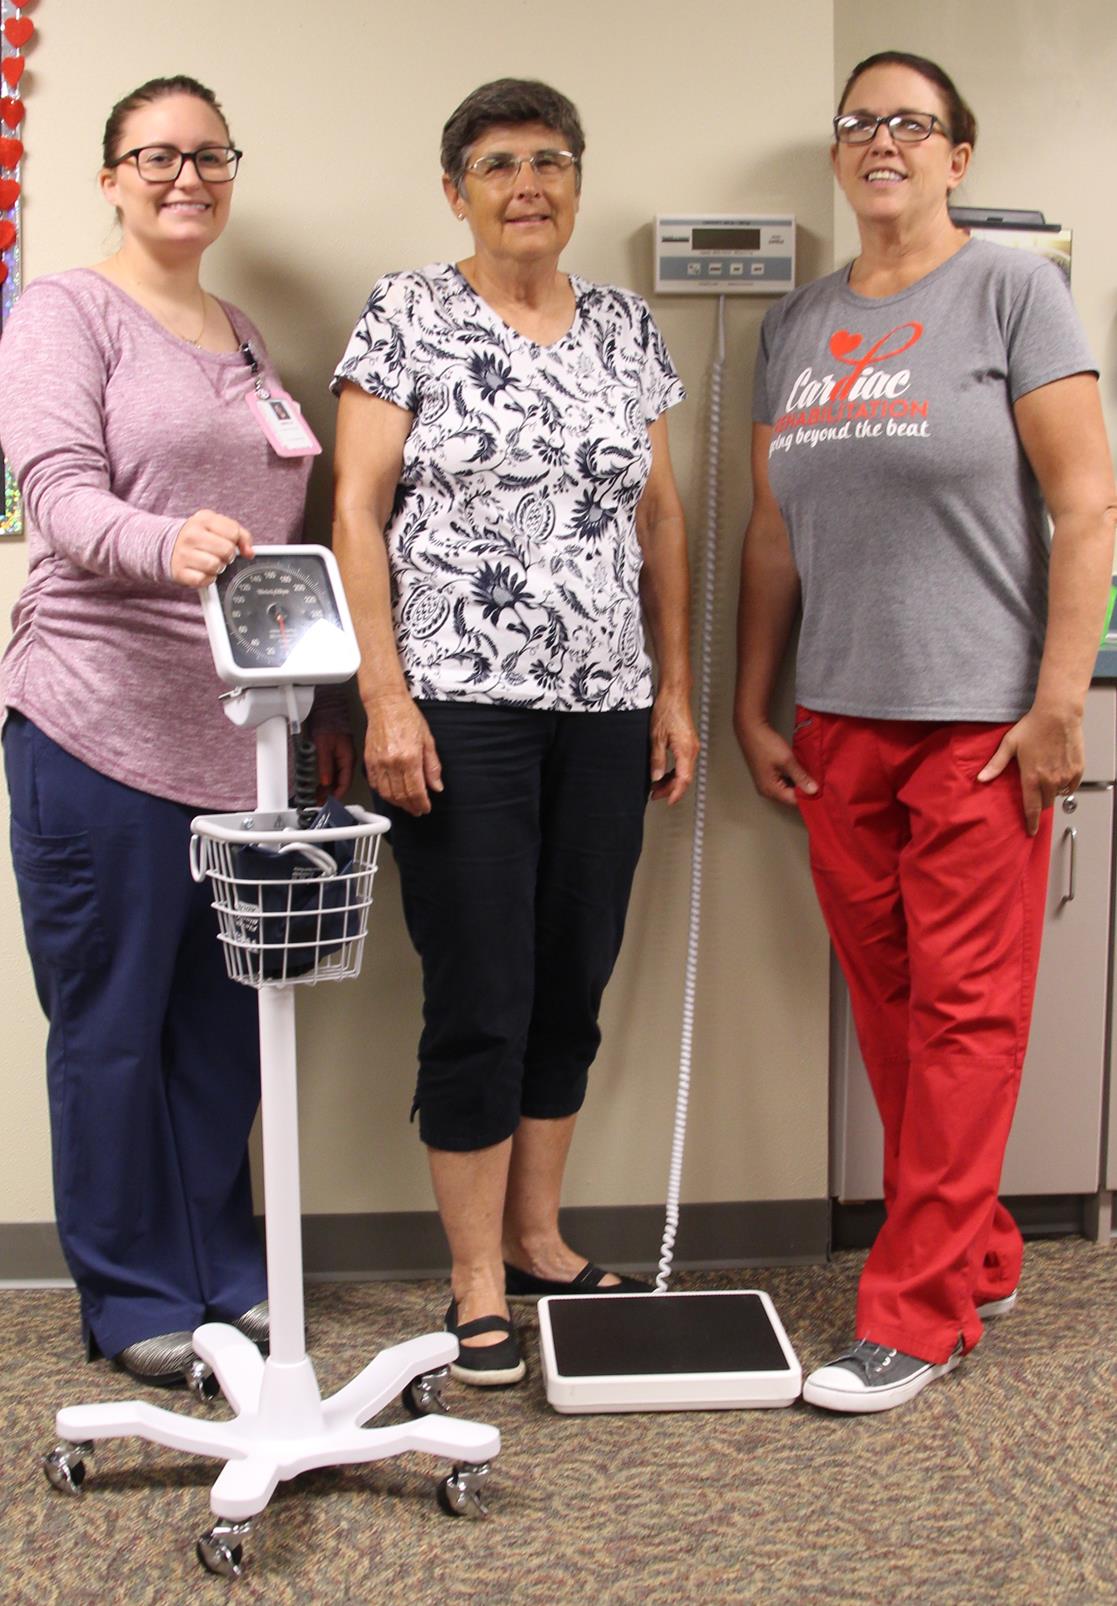 Picture with new cardiac rehab equipment made possible by the Johnson family’s donation are Emily Weets, RN, Donna Johnson, and Trish Jensen, RN.